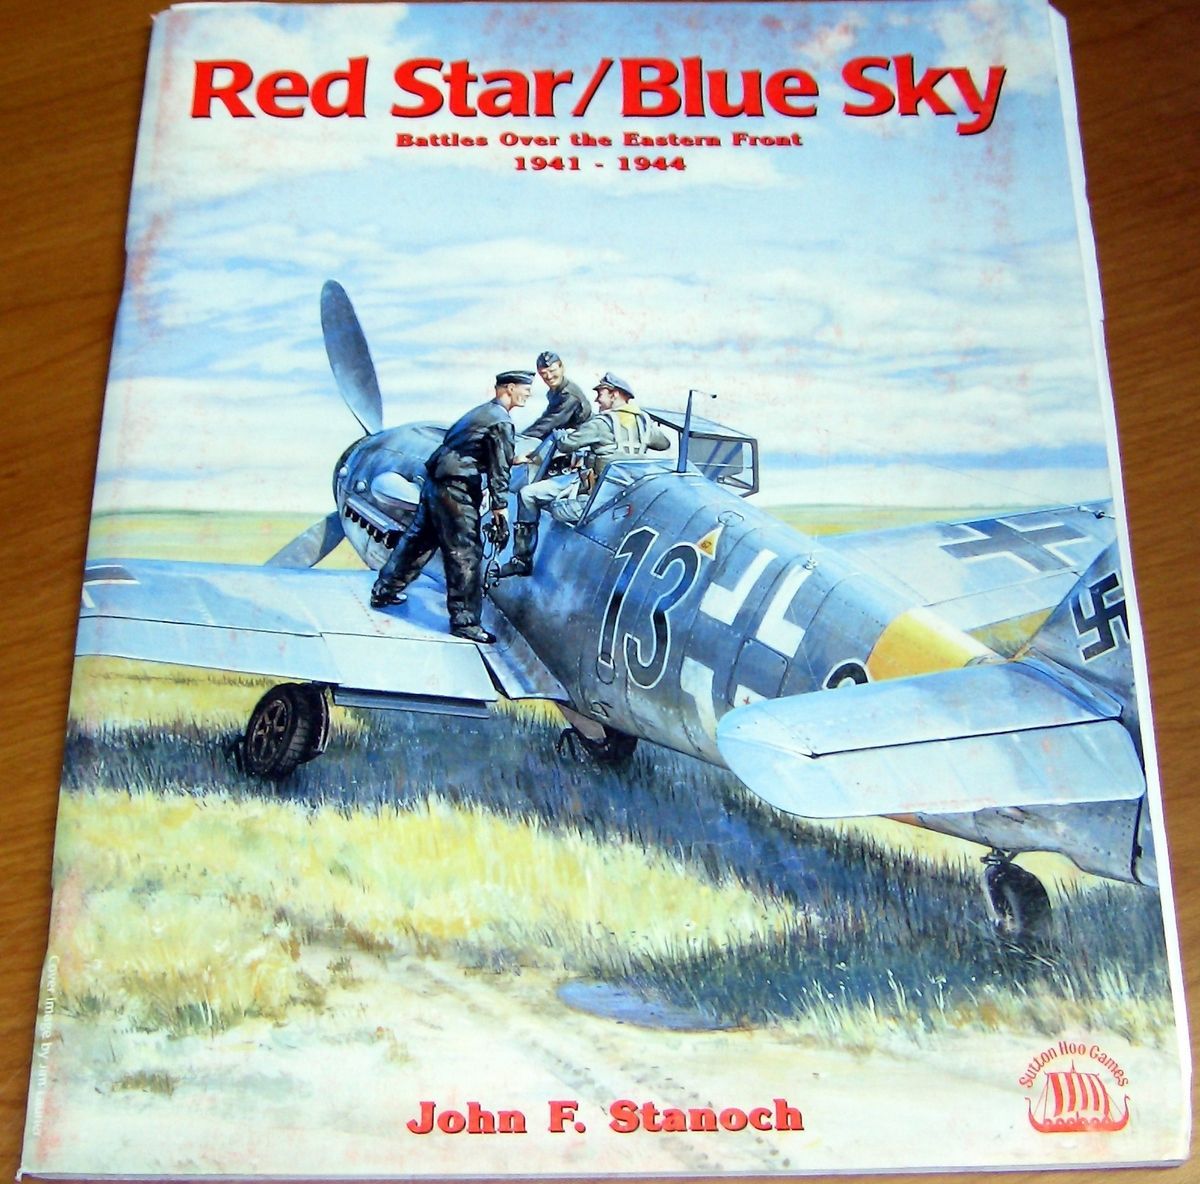 Red Star / Blue Sky: Battles Over the Eastern Front 1941-1944